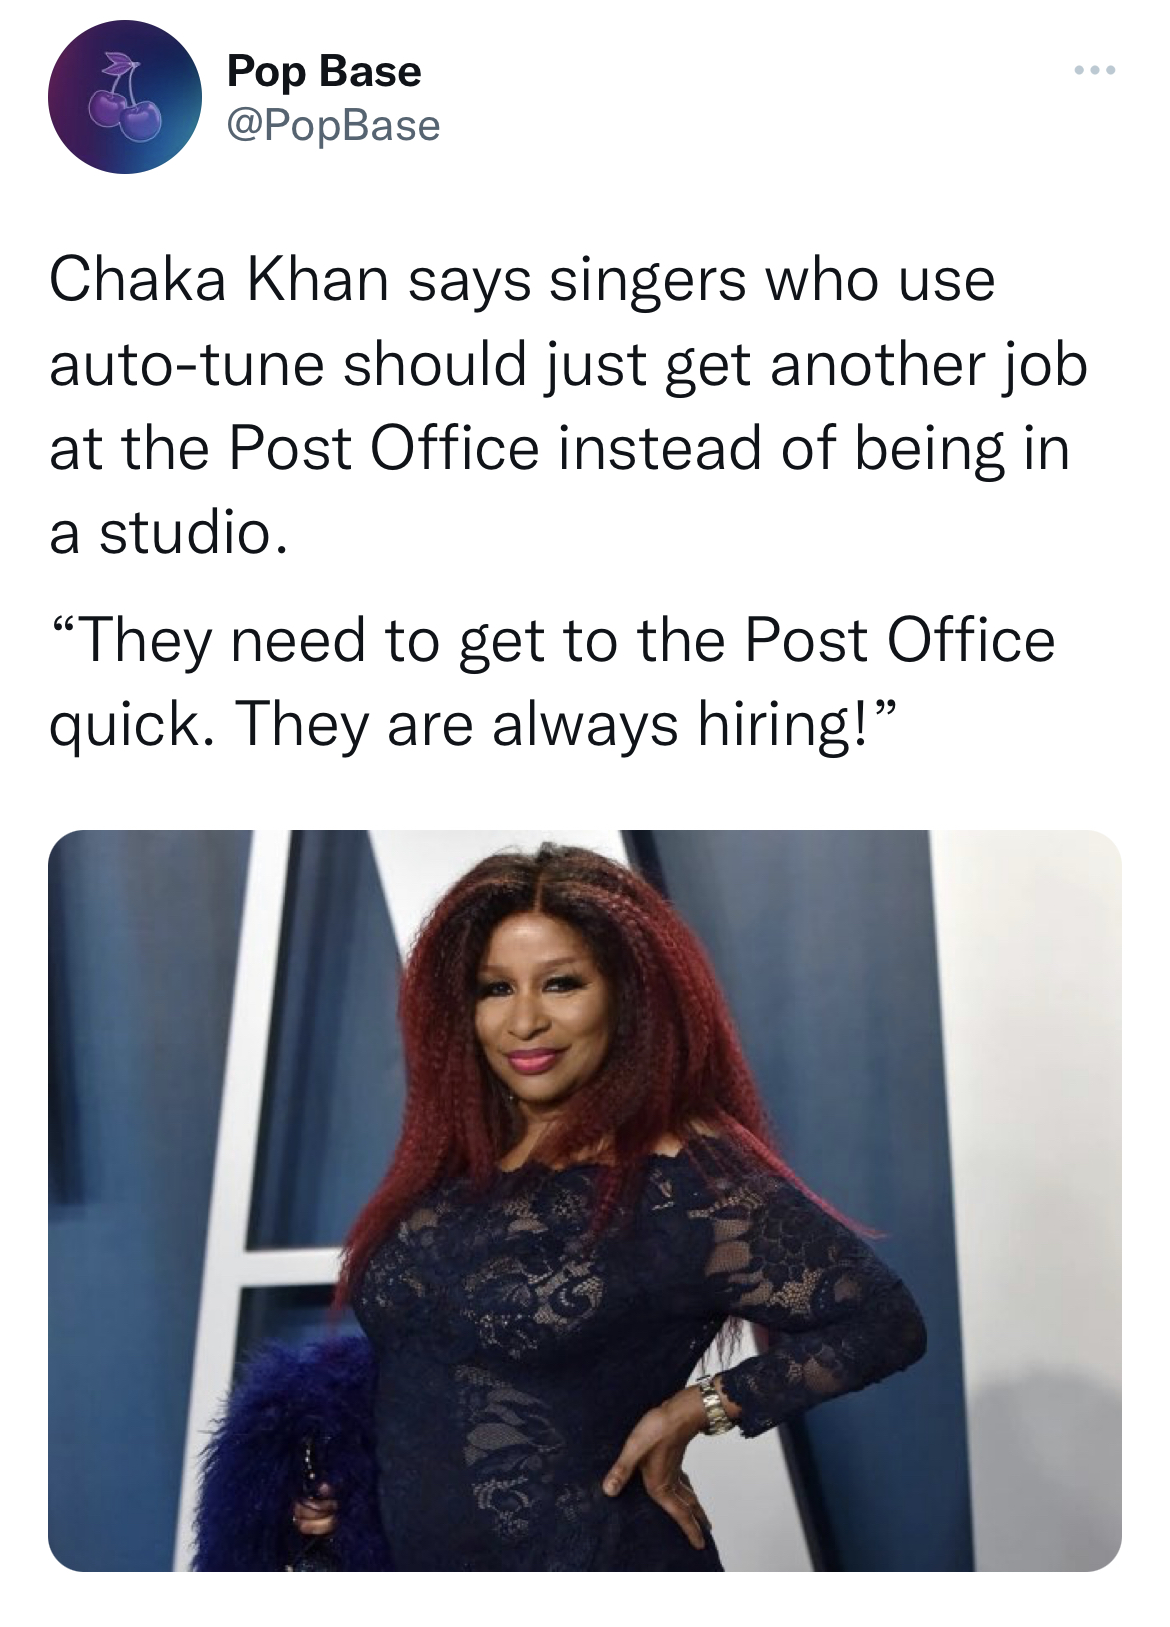 Celeb roasts of the week - media - Pop Base www Chaka Khan says singers who use autotune should just get another job at the Post Office instead of being in a studio. "They need to get to the Post Office quick. They are always hiring!"